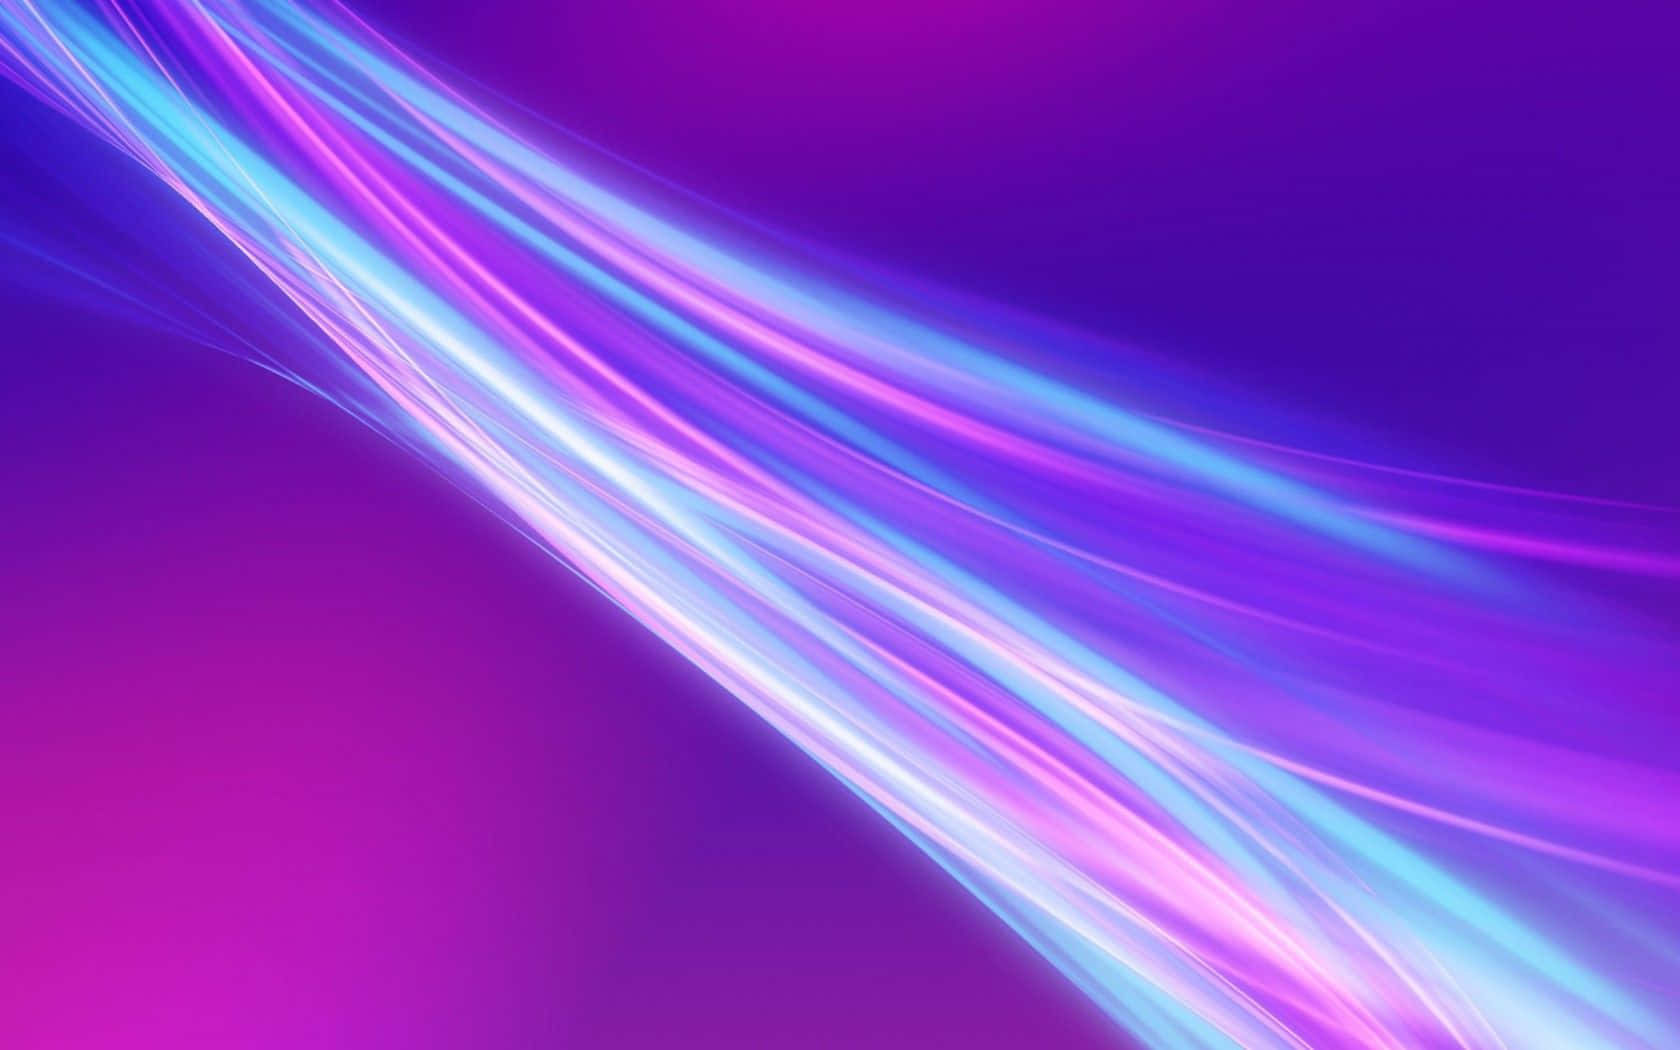 Experience the Festive Lights of Neon Colors Wallpaper